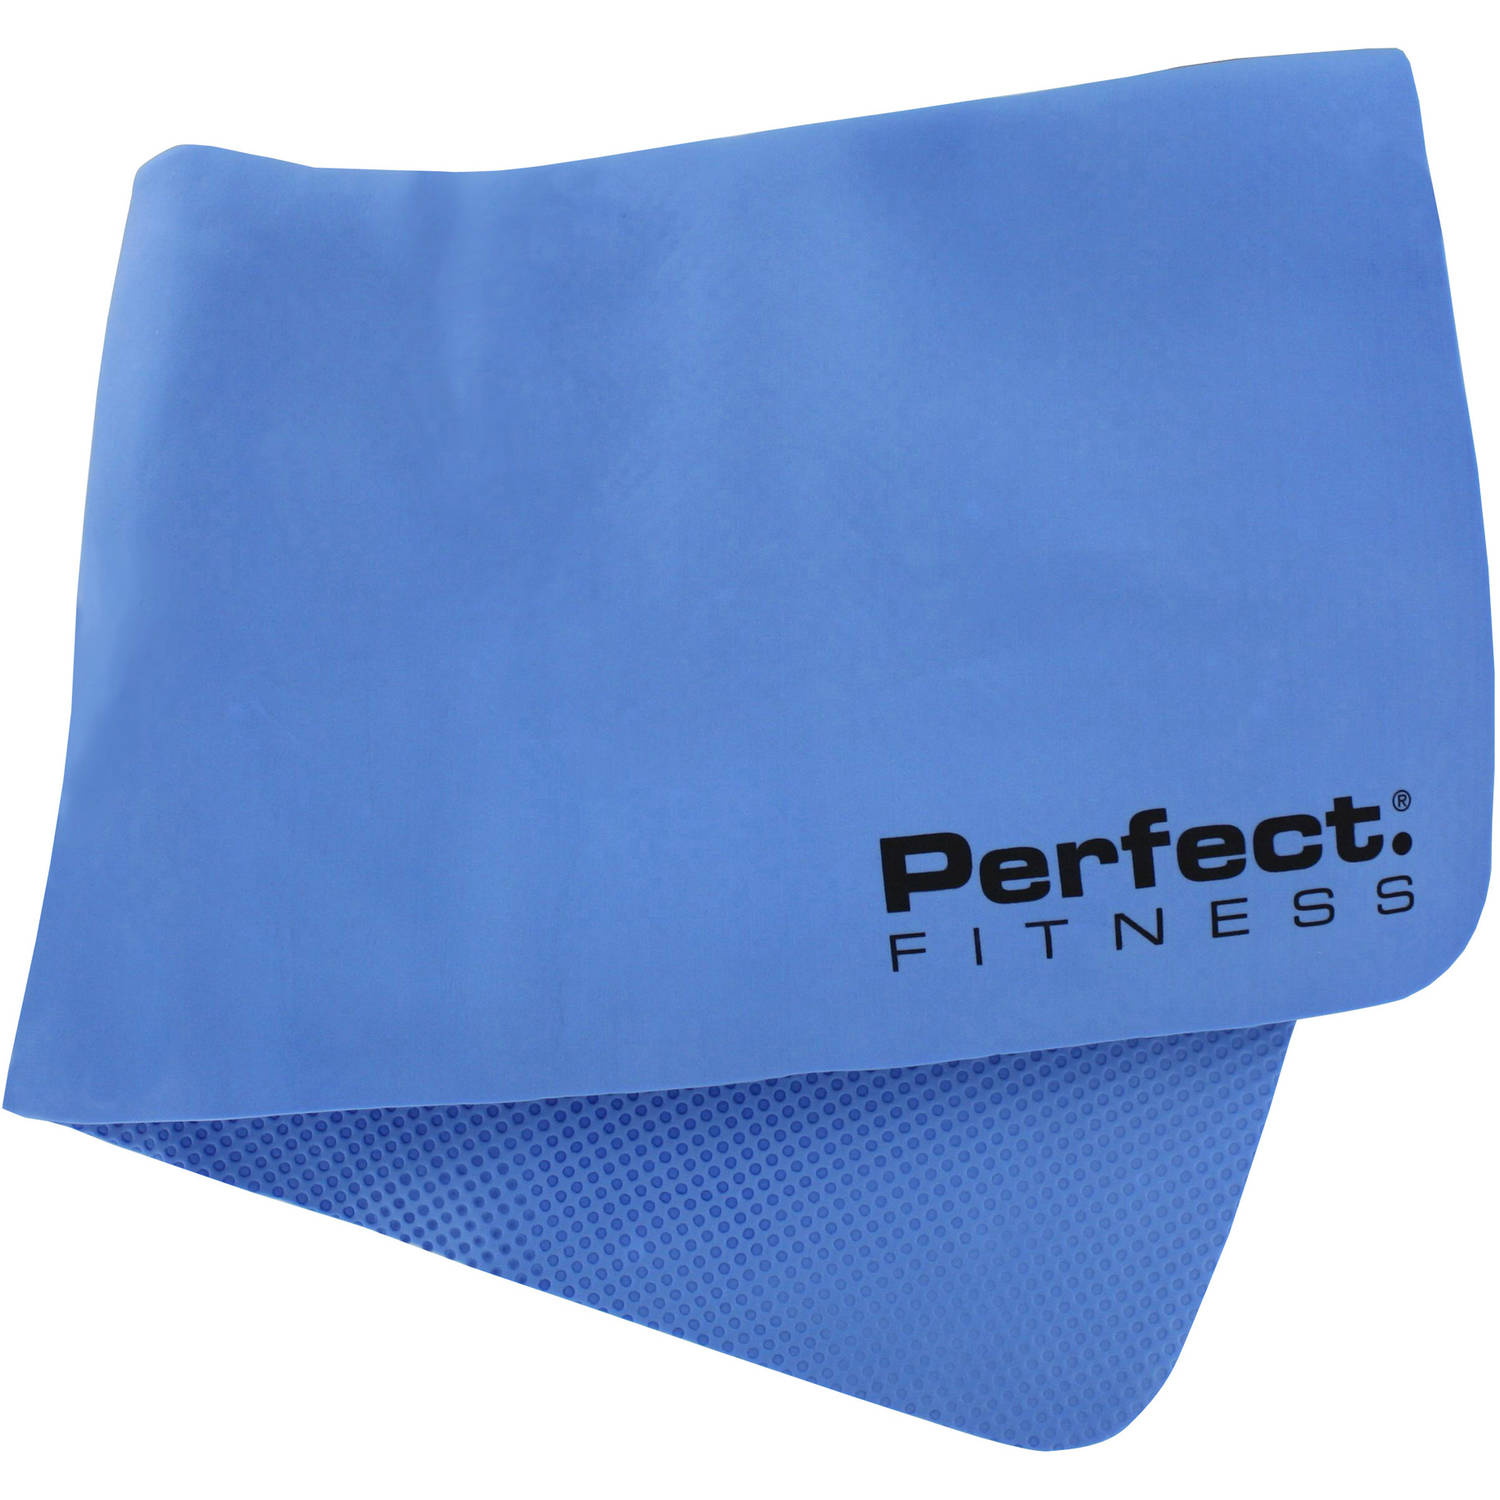 sports towels to keep you cool